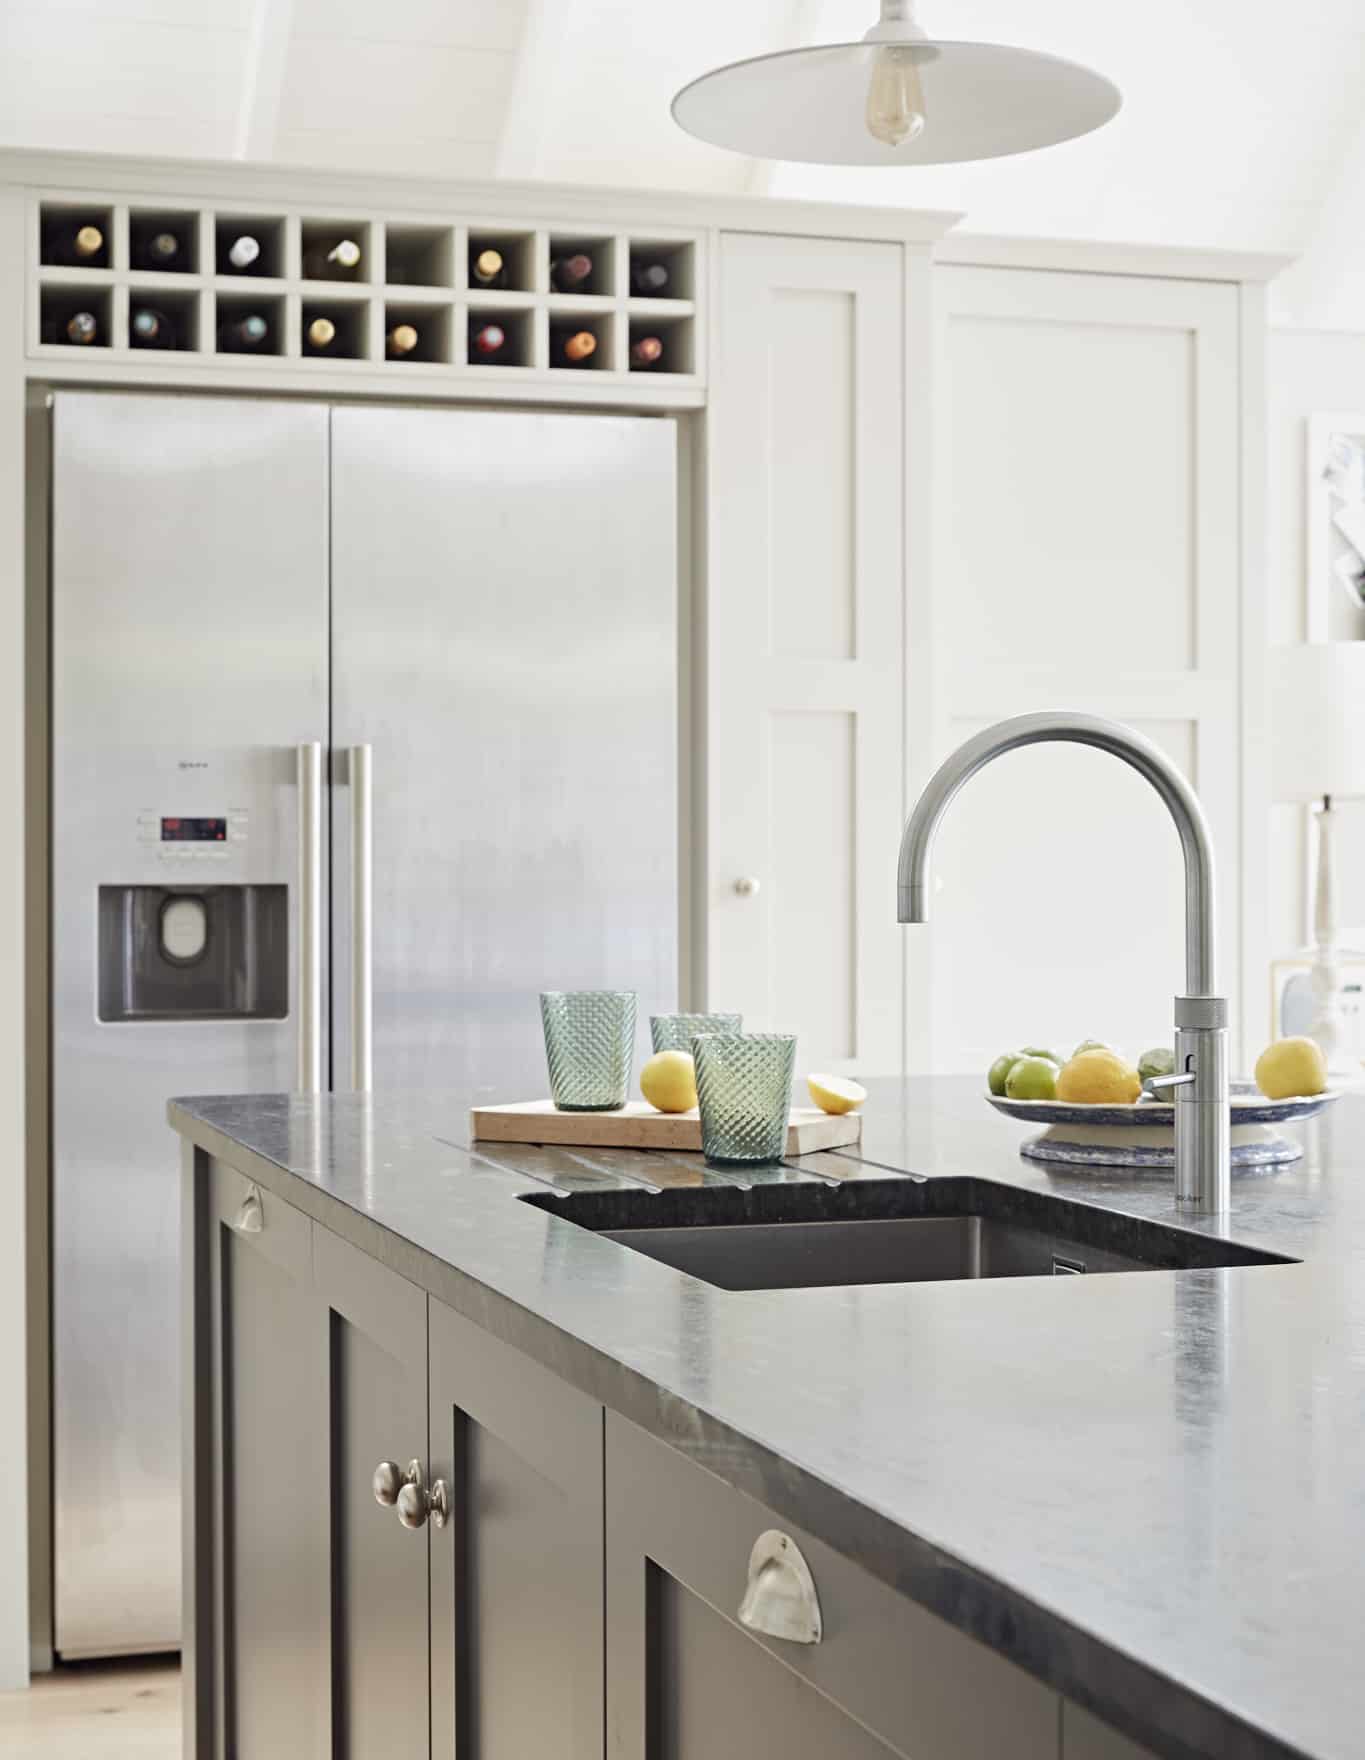 John Lewis of Hungerford Shaker kitchen in grey with marble worktops